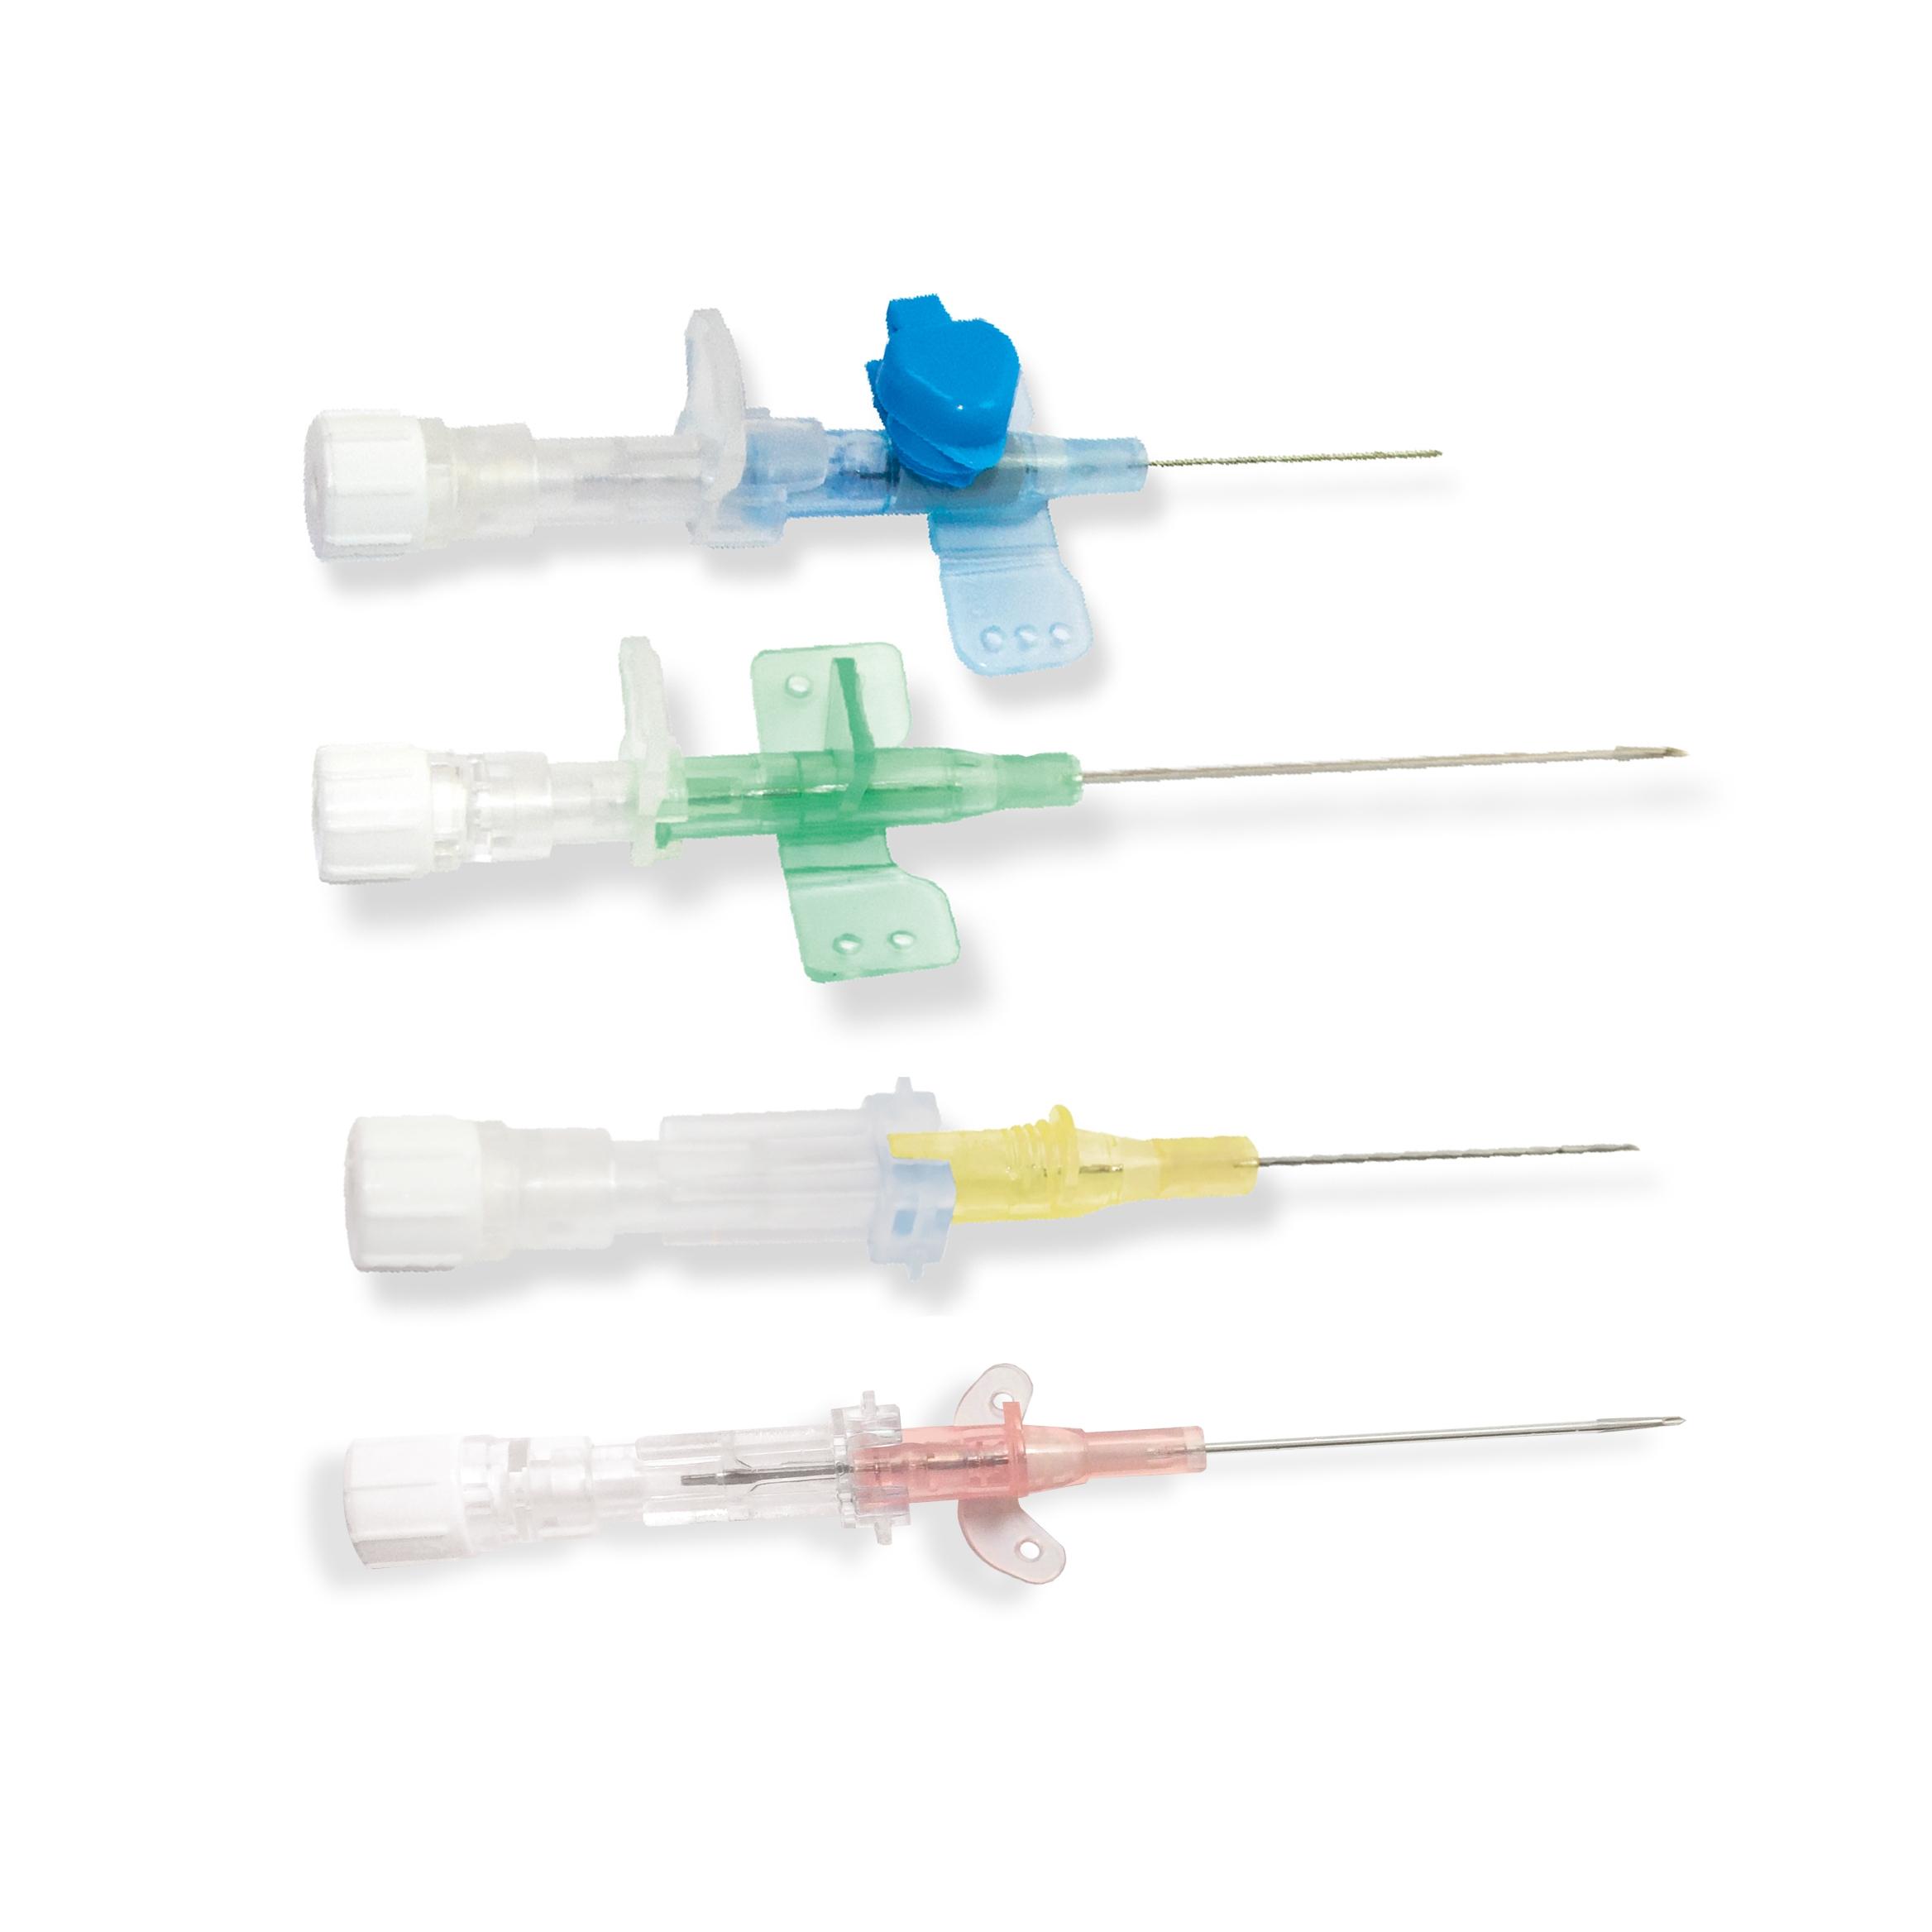 NEOPOLYCATH® secure catheters